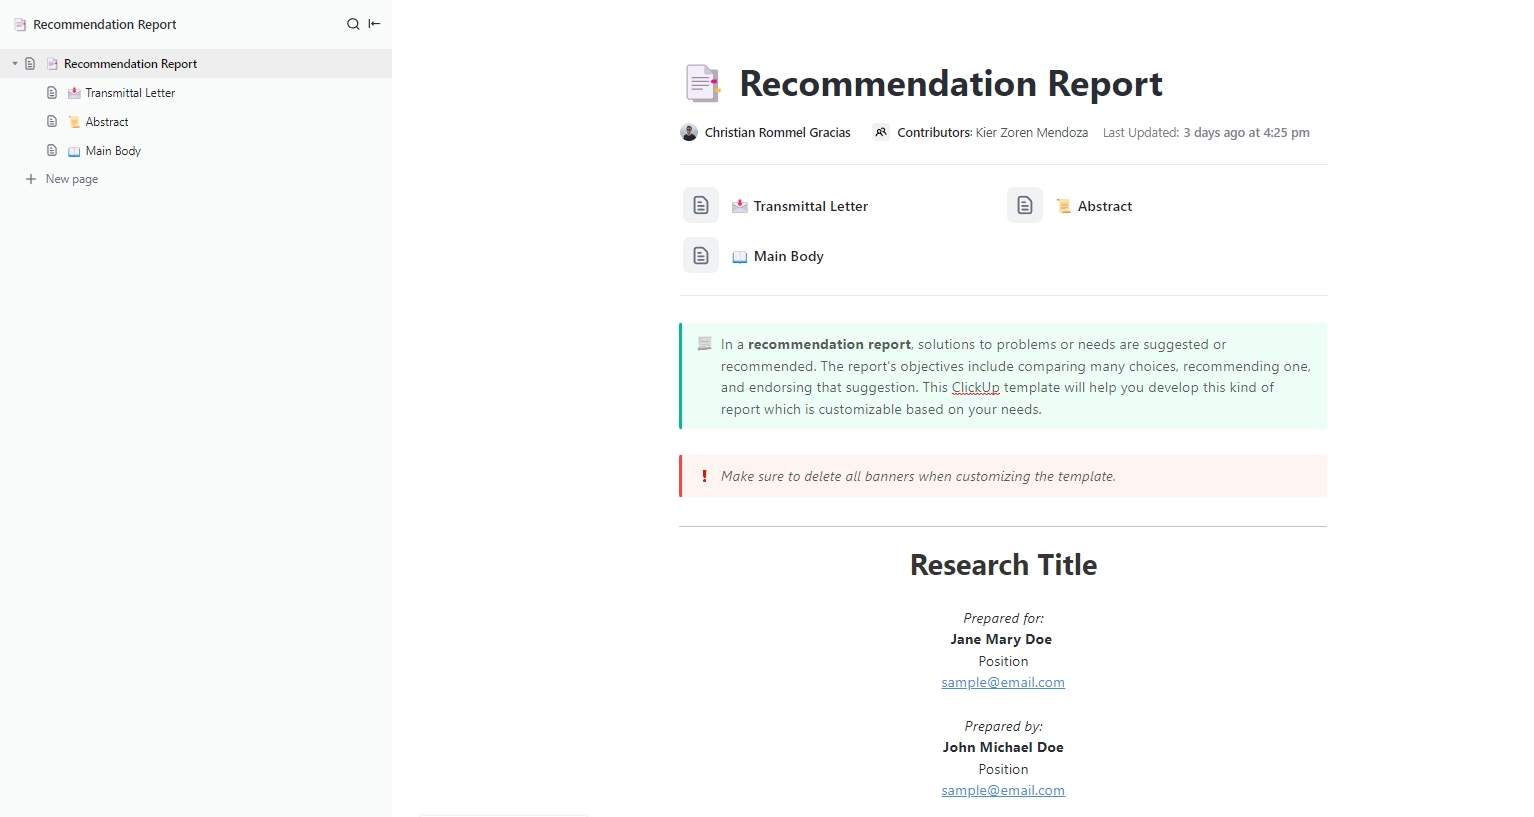 In a recommendation report, solutions to problems or needs are suggested or recommended. The report's objectives include comparing many choices, recommending one, and endorsing that suggestion. This ClickUp template will help you develop this kind of report which is customizable based on your needs.